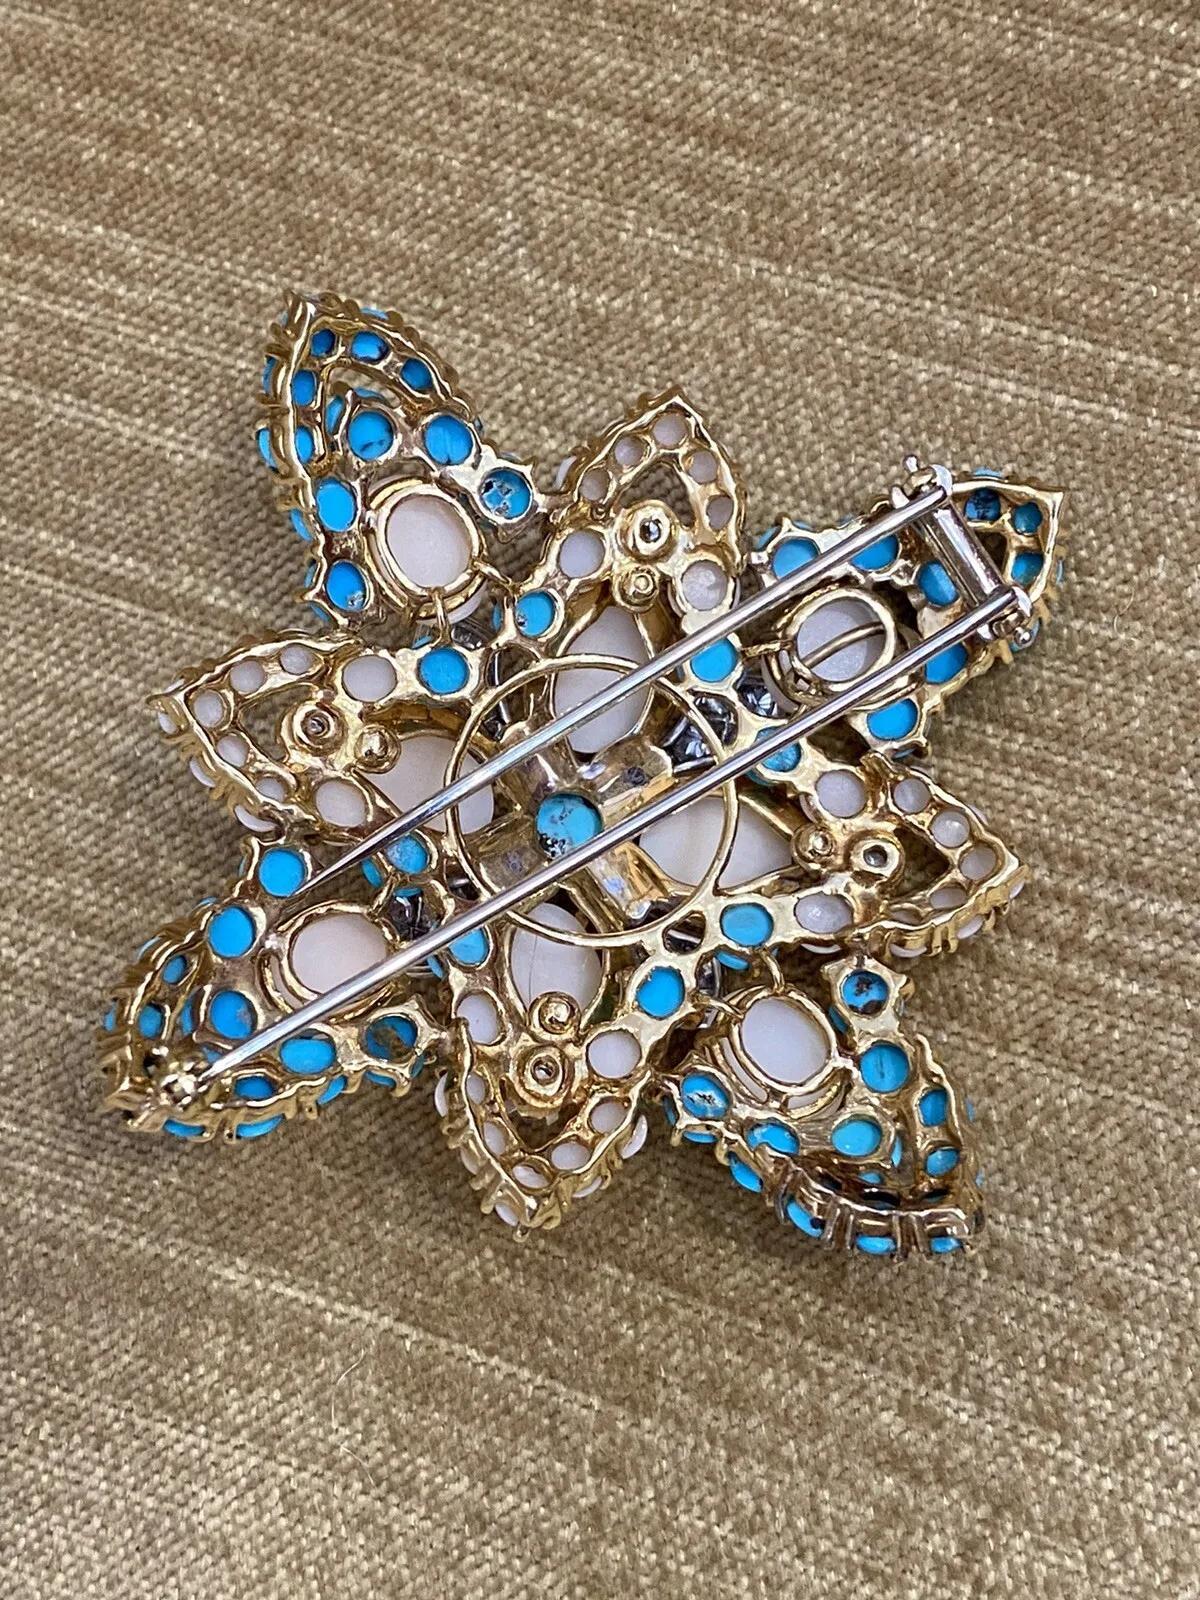 Angel Skin Coral & Turquoise Maltese Cross Pin Brooch 18k Yellow Gold For Sale 2